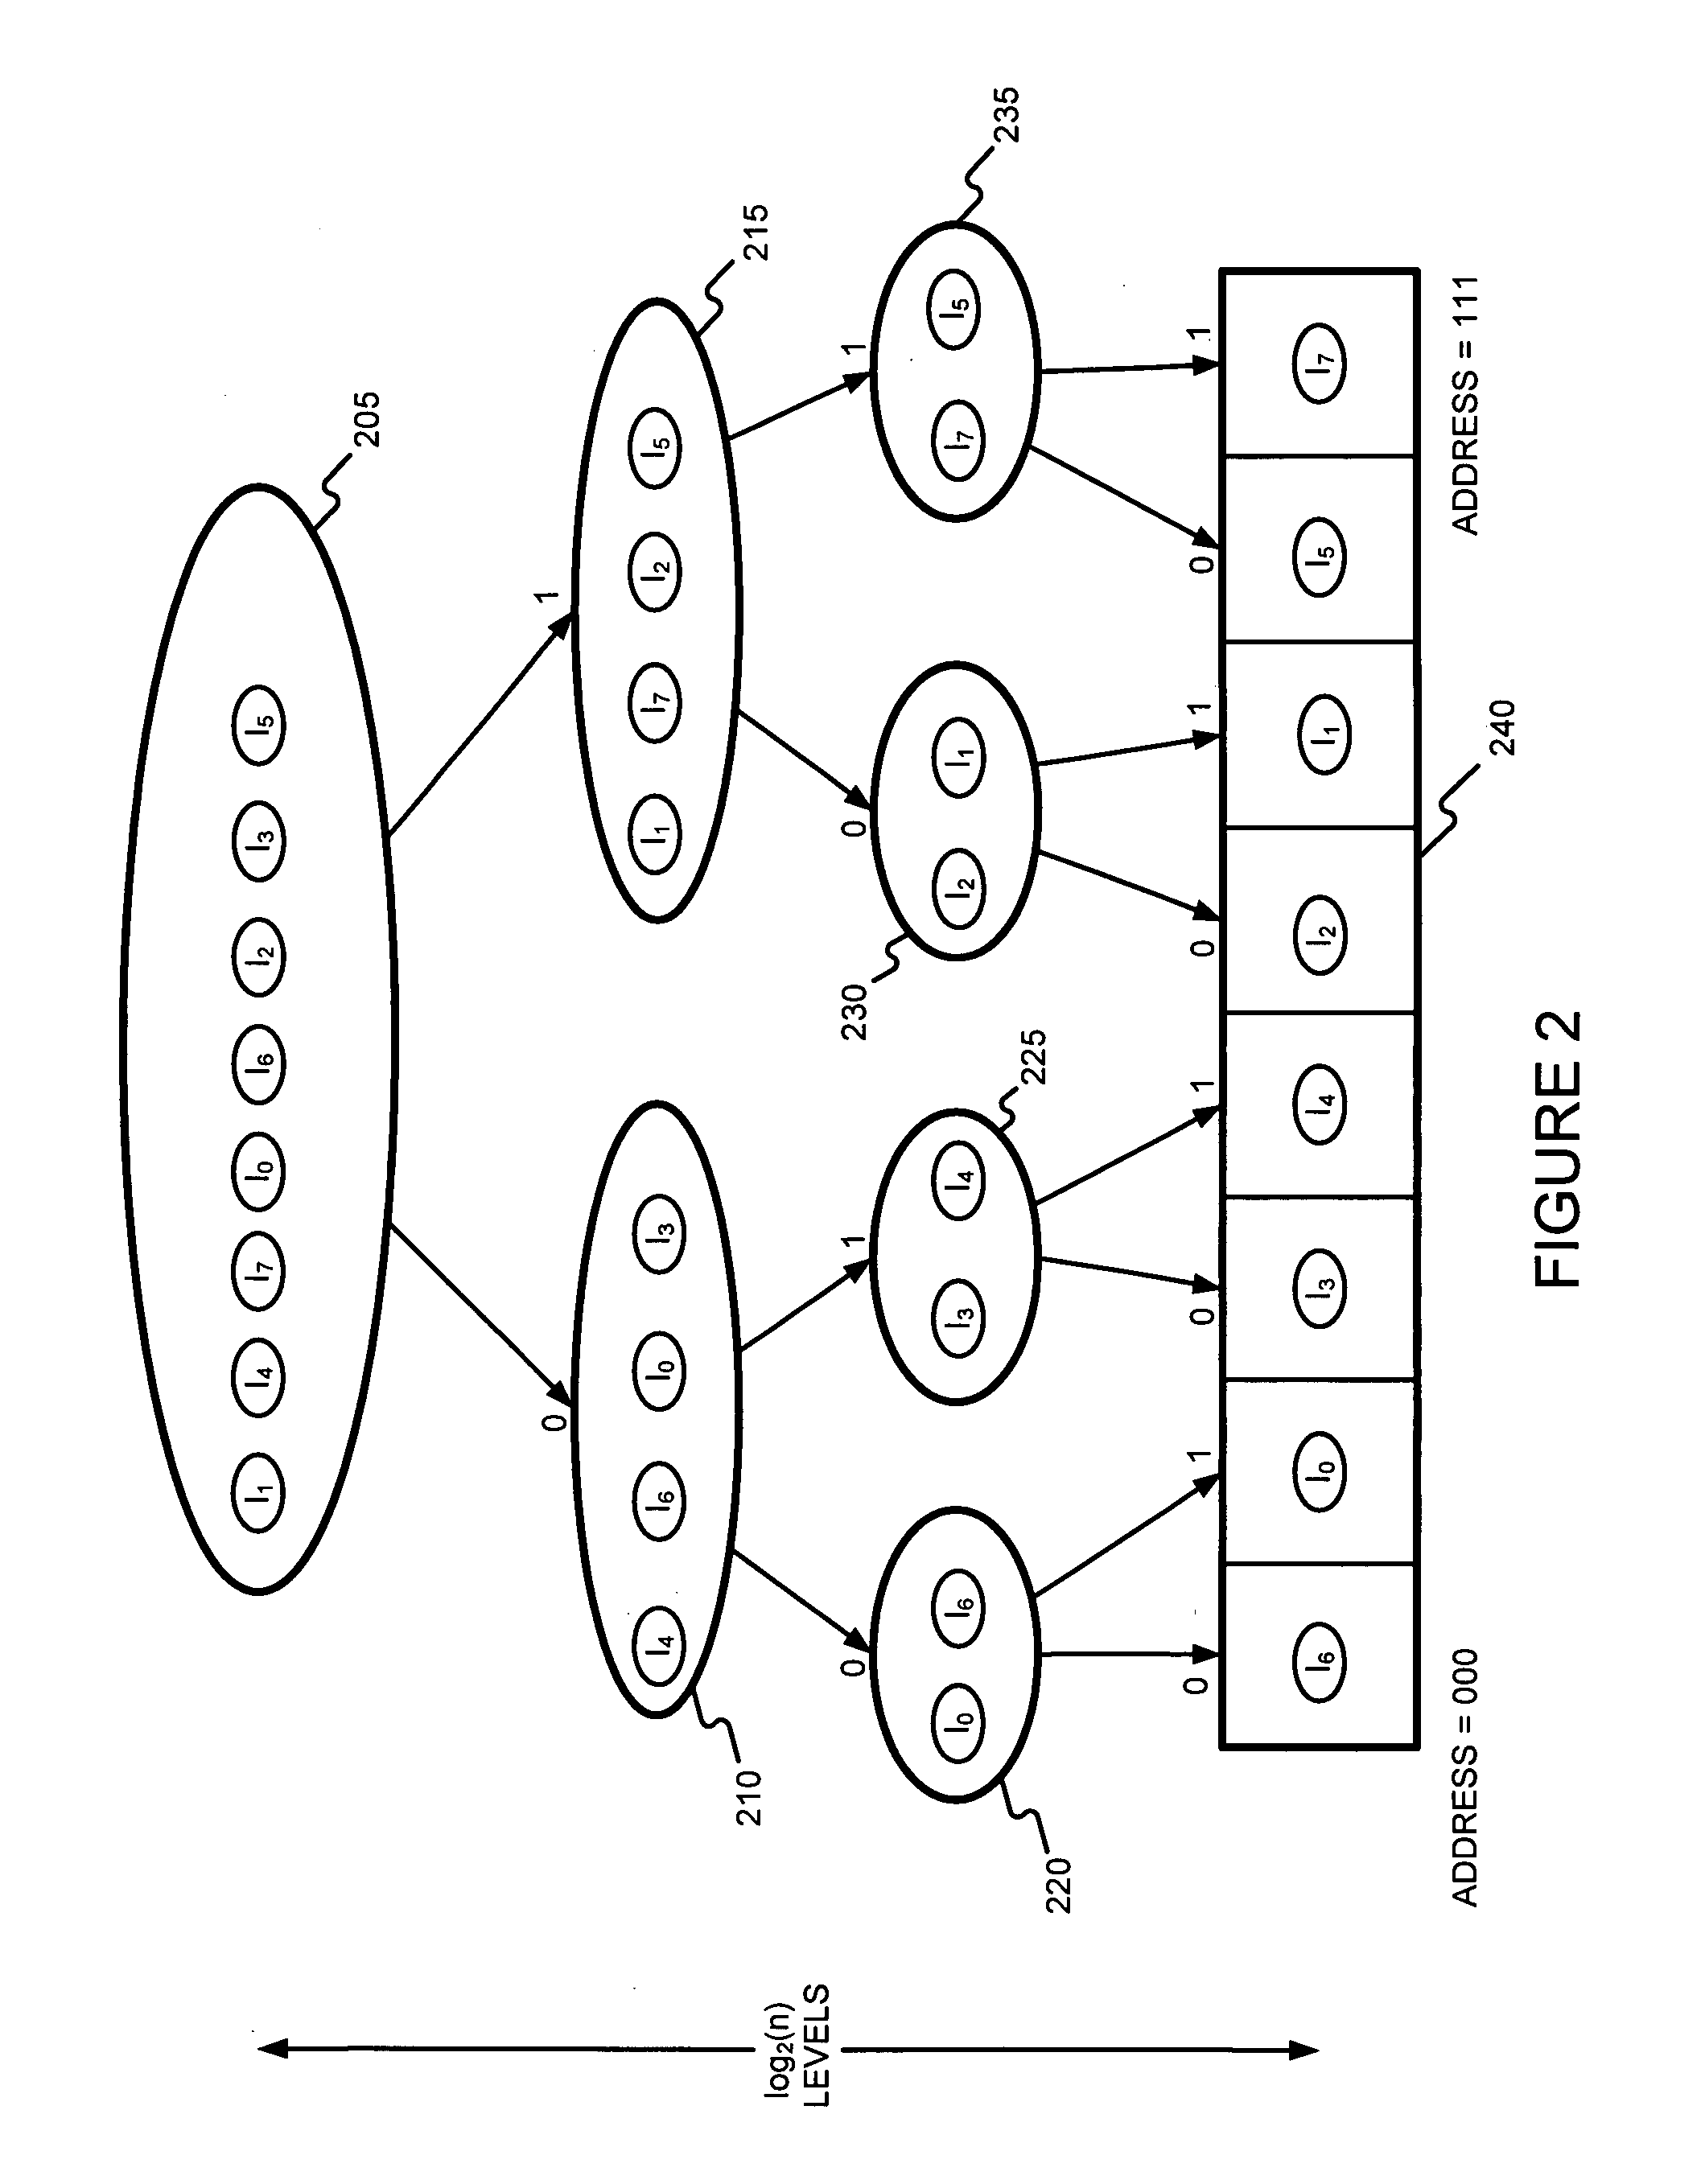 Generating a hierarchical data structure associated  with a plurality of known arbitrary-length bit strings used for detecting whether an arbitrary-length bit string input matches one of a plurality of known arbitrary-length bit string